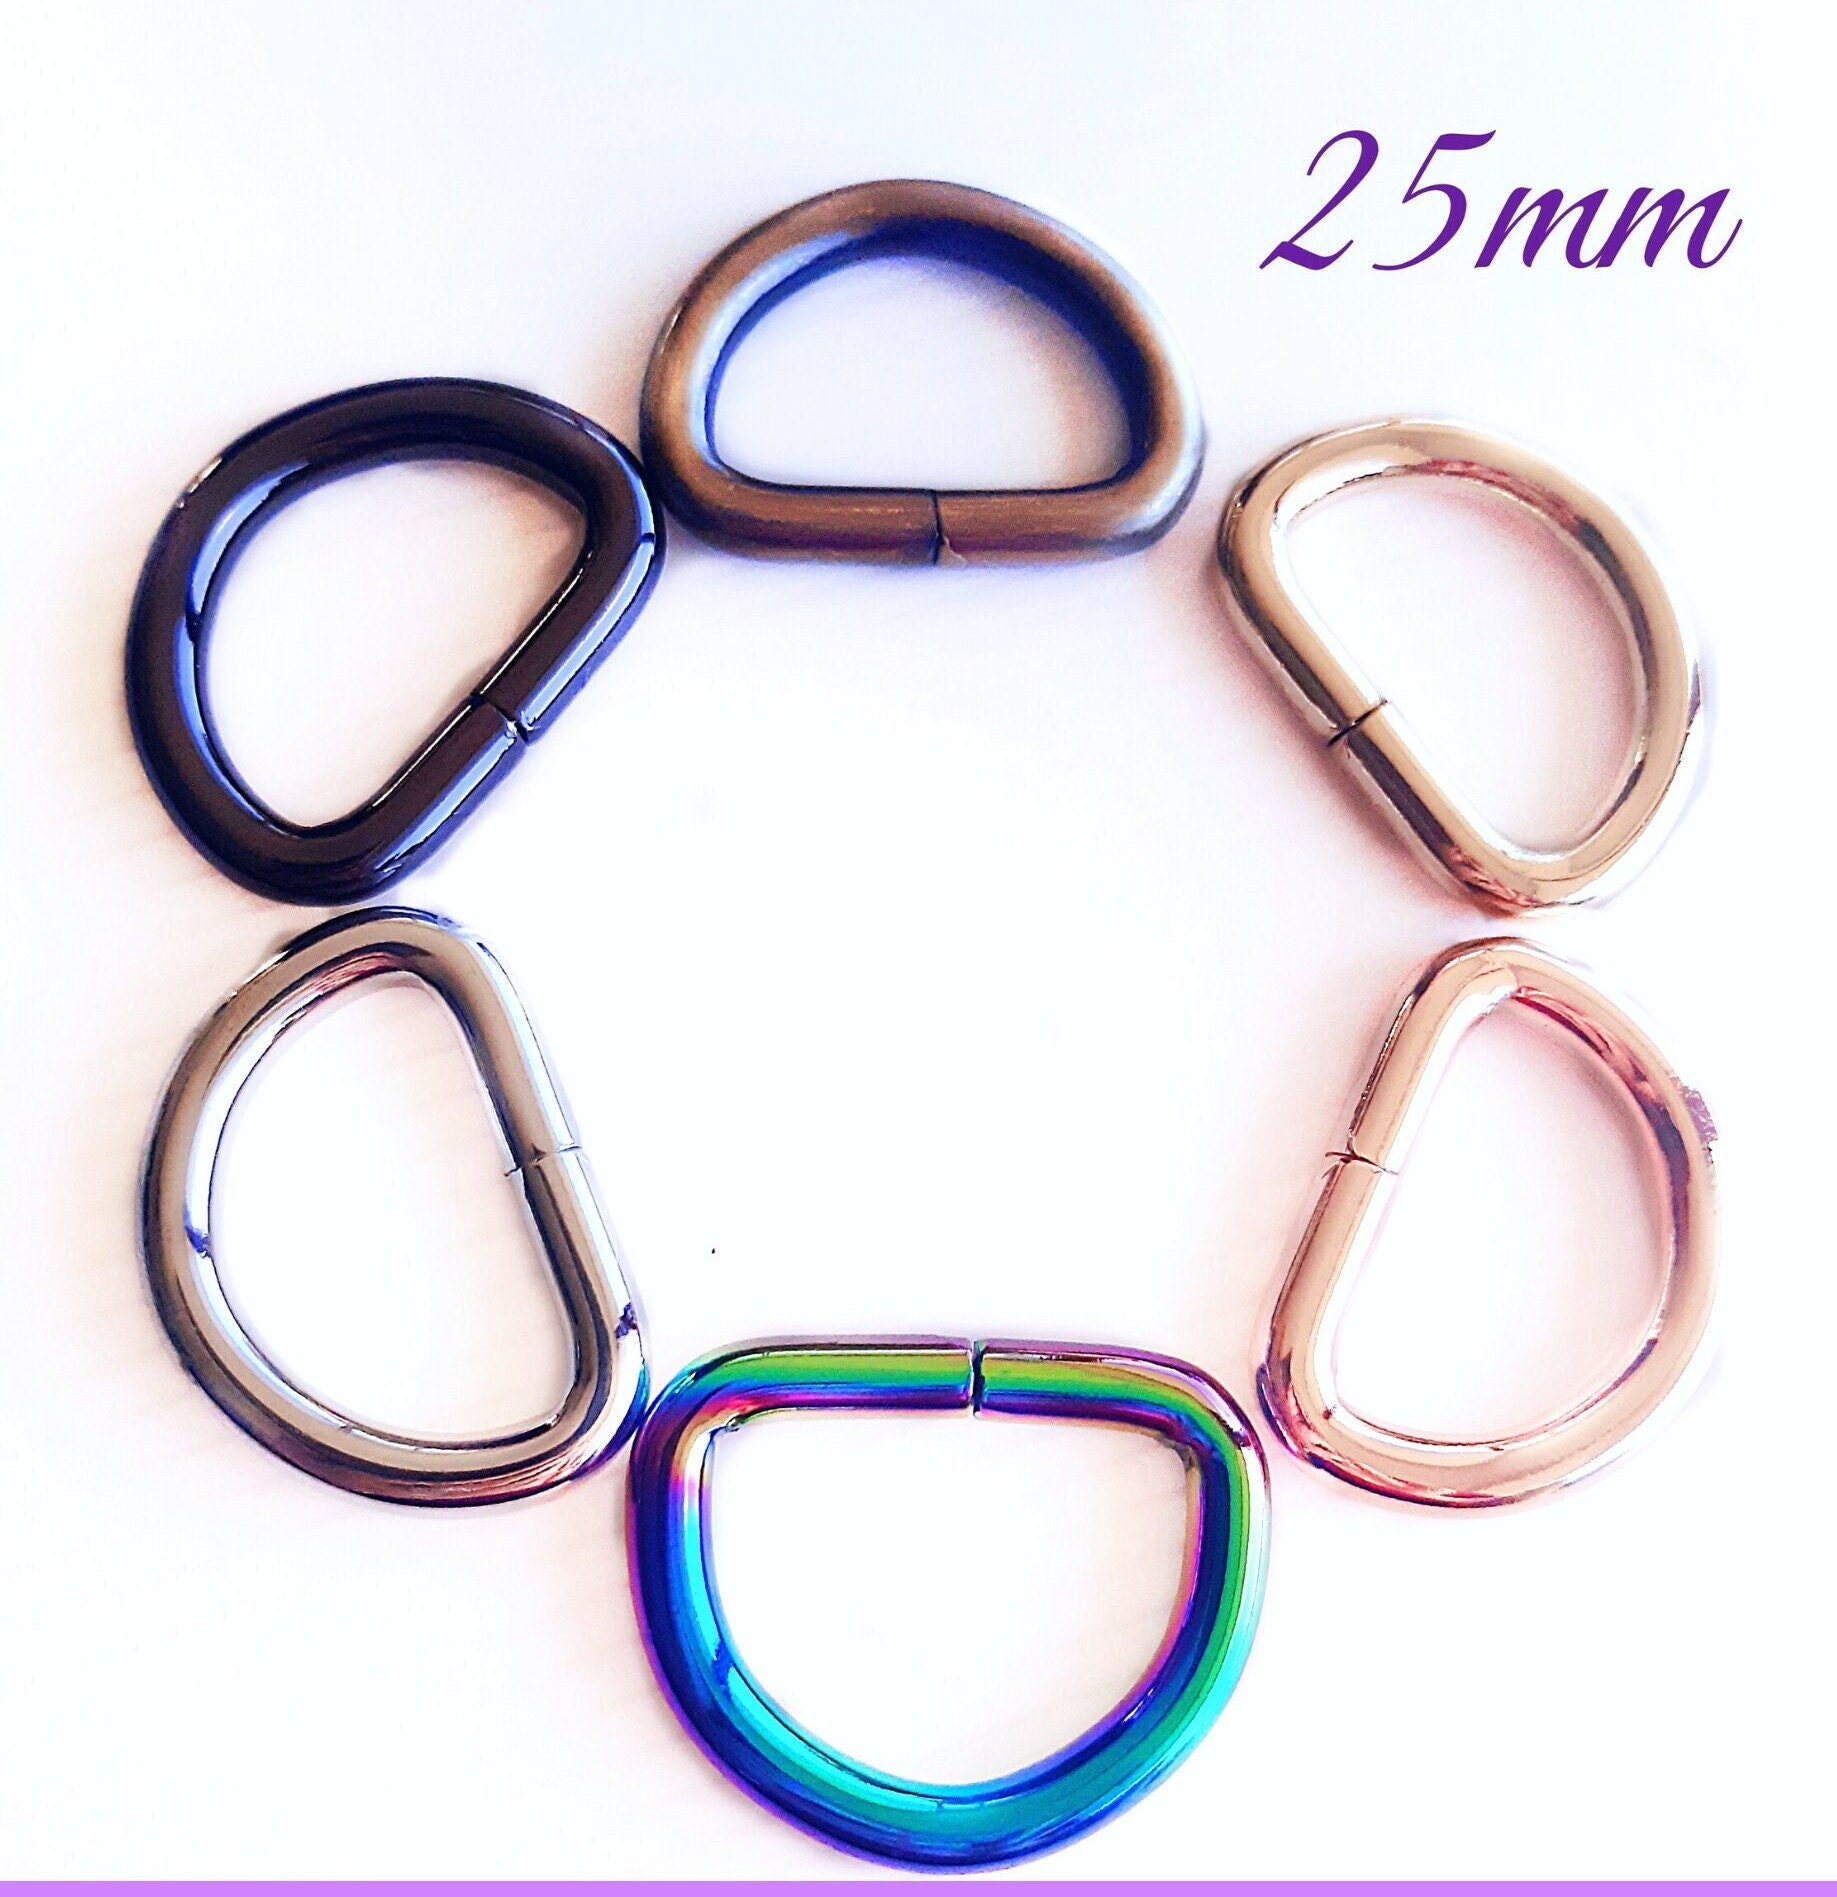  Gold D Rings for Purses,D-Ring with Screw for Crossbody Bag  Purse Craft,4 Sets (Interior-1.6cm)